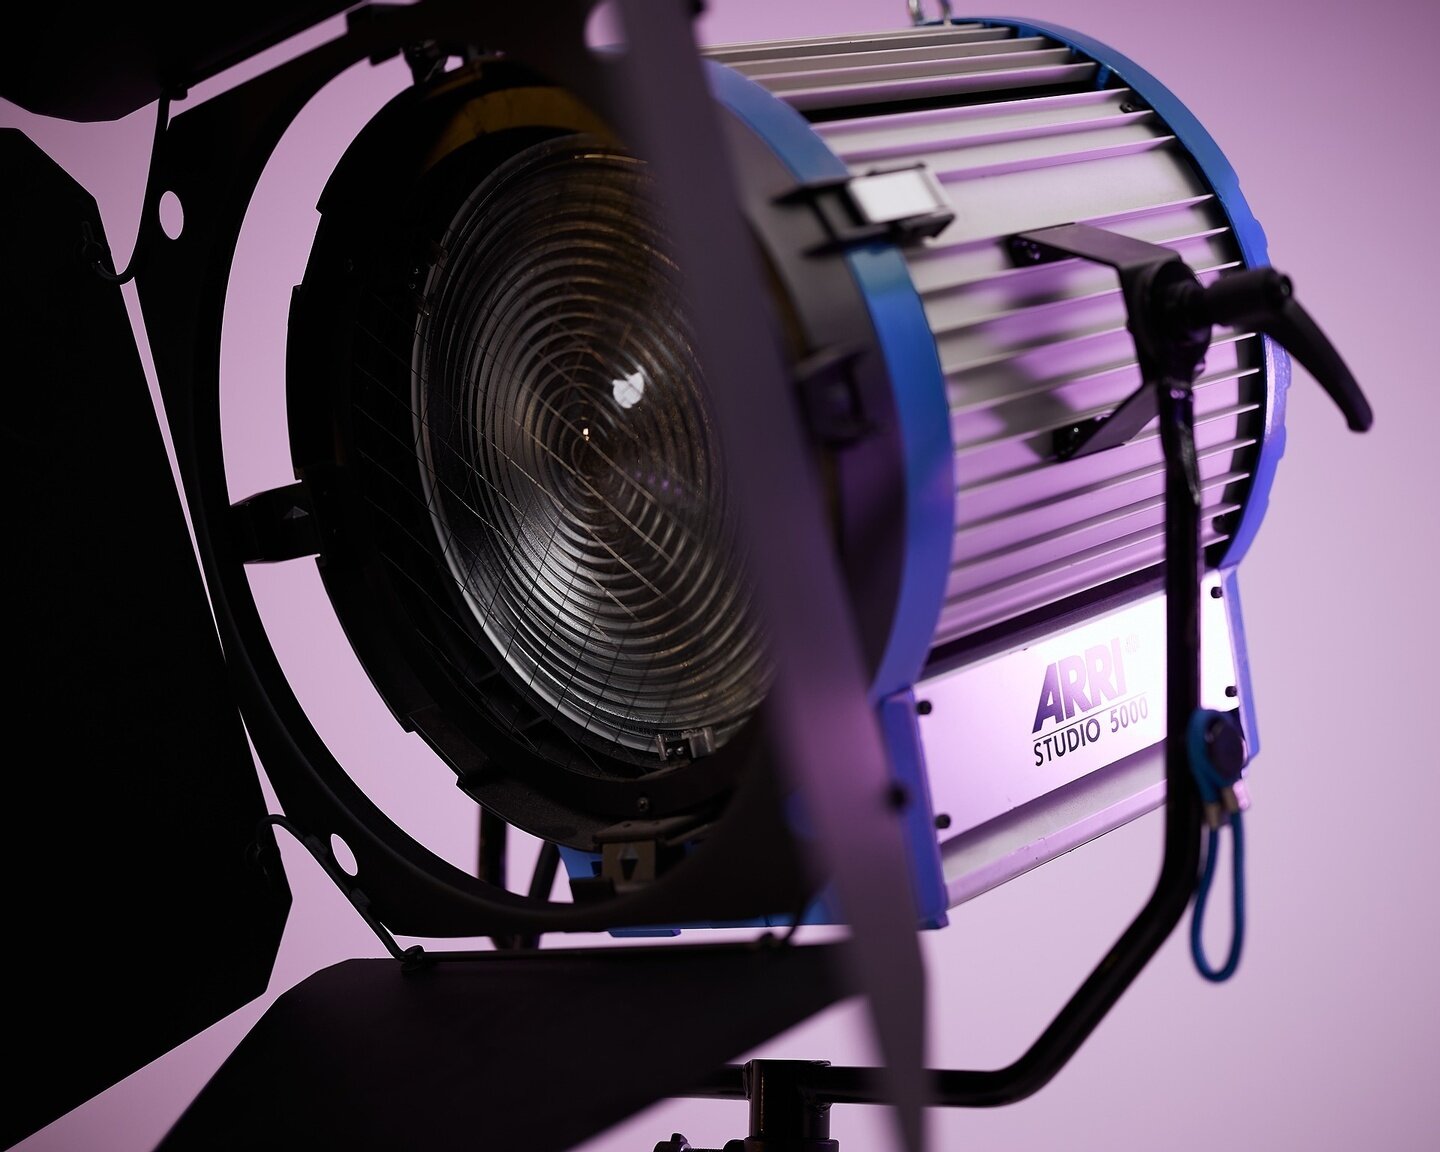 There's always a place for Tungsten! #FixtureFocus this week is the epic Arri 5K Tungsten. Despite it's size, heat and power requirements - you can't quite beat the output of Tungsten lights when it comes to light quality. We recently measured our cl